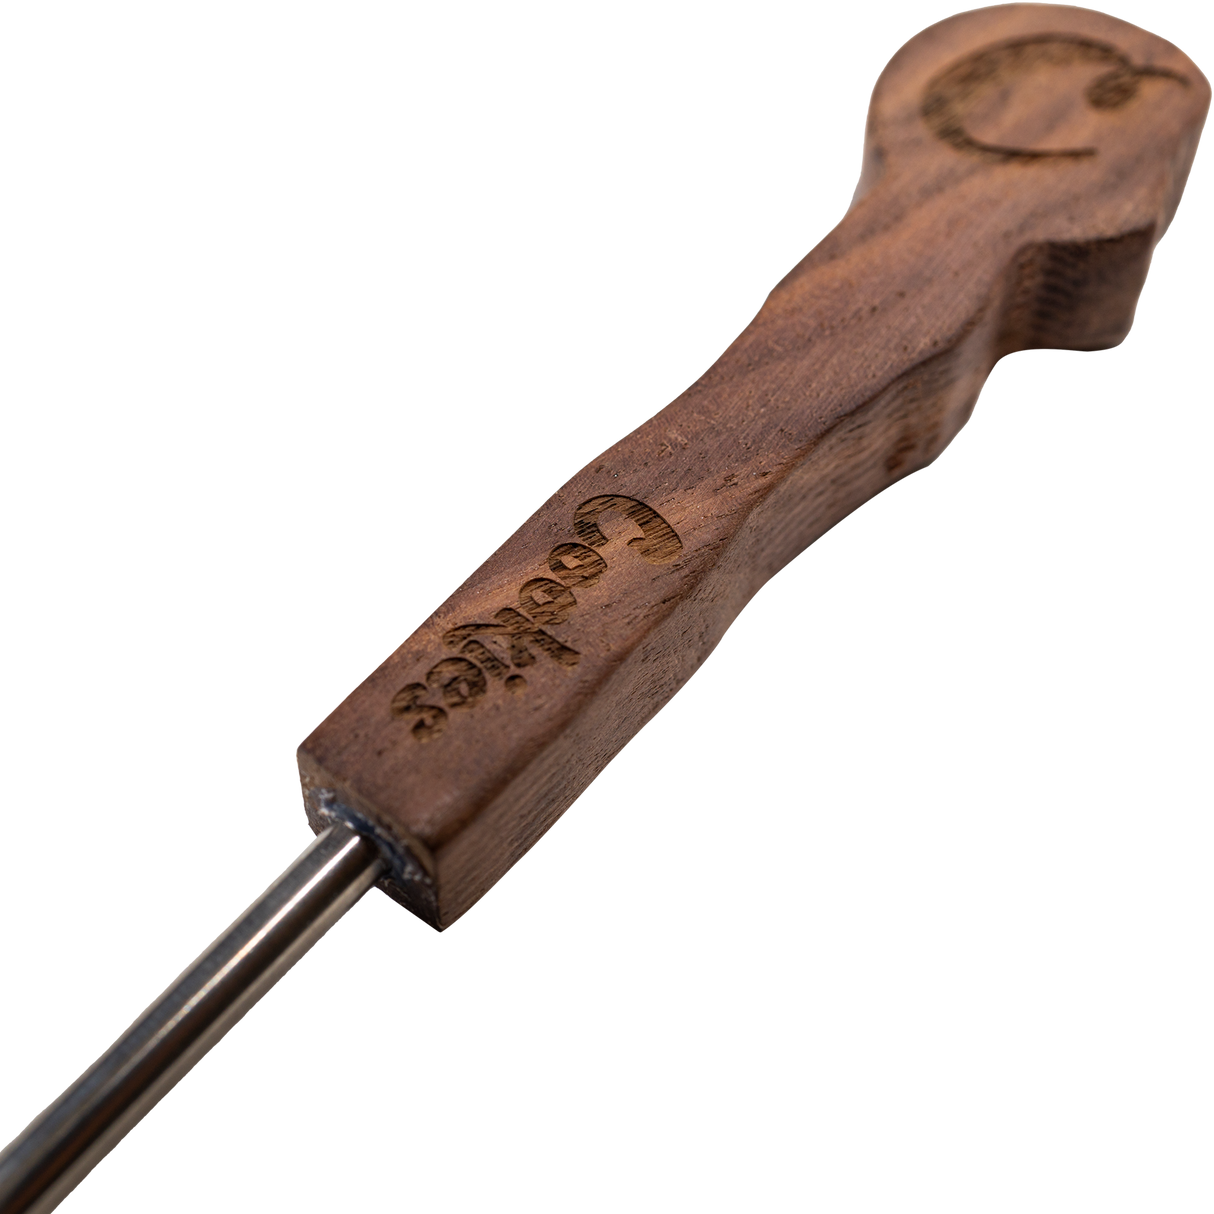 Cookies Wax Tool with Titanium Flat Tip and Engraved Wooden Handle - Close-up